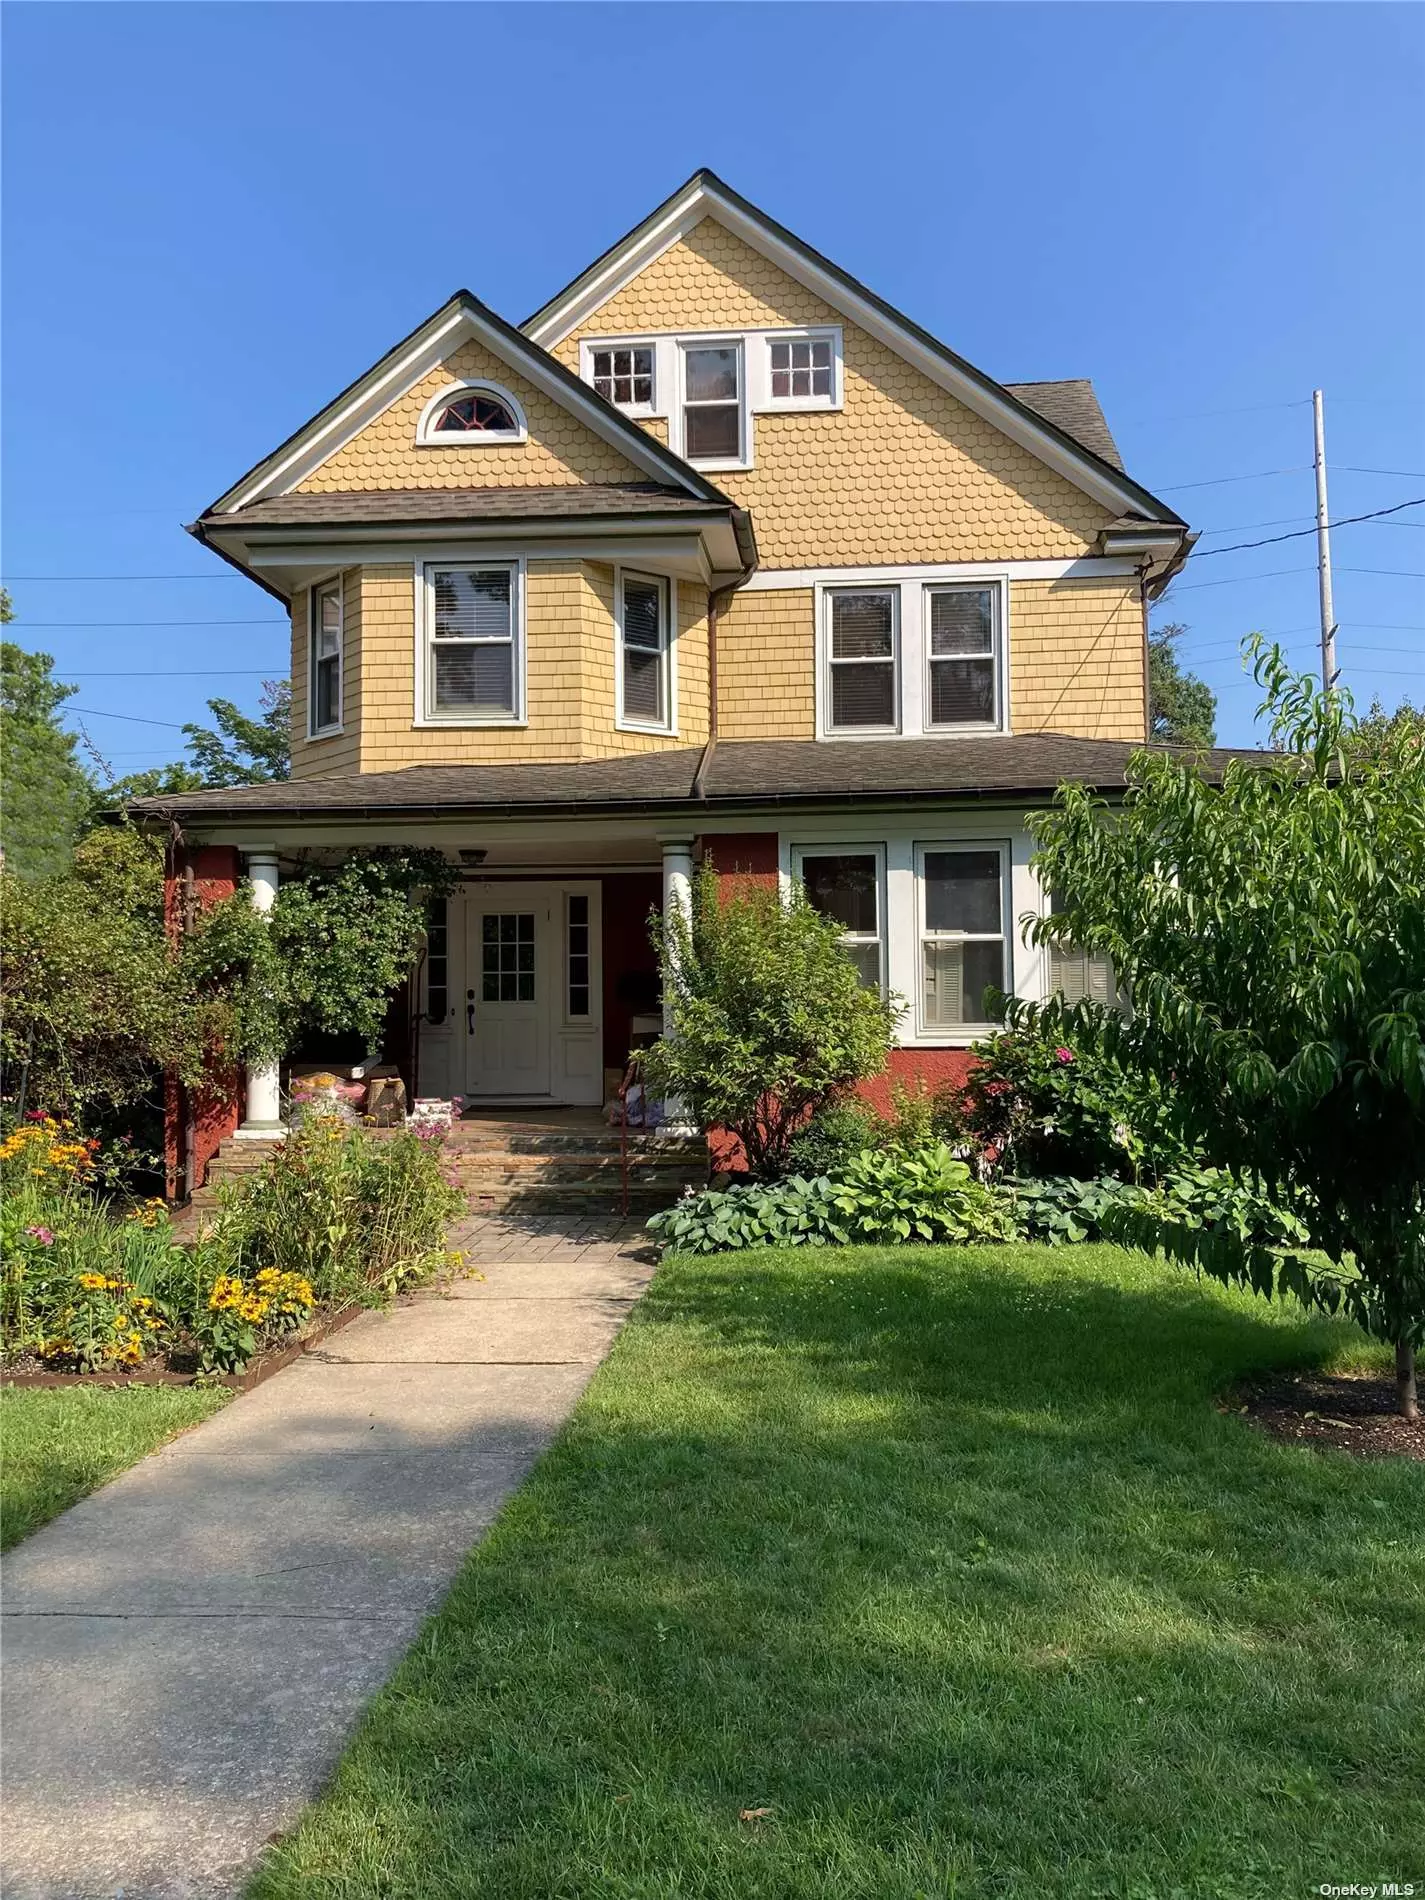 Charming and spacious 5 bed, 2.5 bath with central a/c and sparkling in ground pool on quiet street in the heart of Cedarhurst on one of the most prestigious blocks in town. Close to park, restaurants, shopping, worship and public transportation. 50&rsquo;x175&rsquo; lot, long driveway and low taxes. NOT FLOOD ZONE -